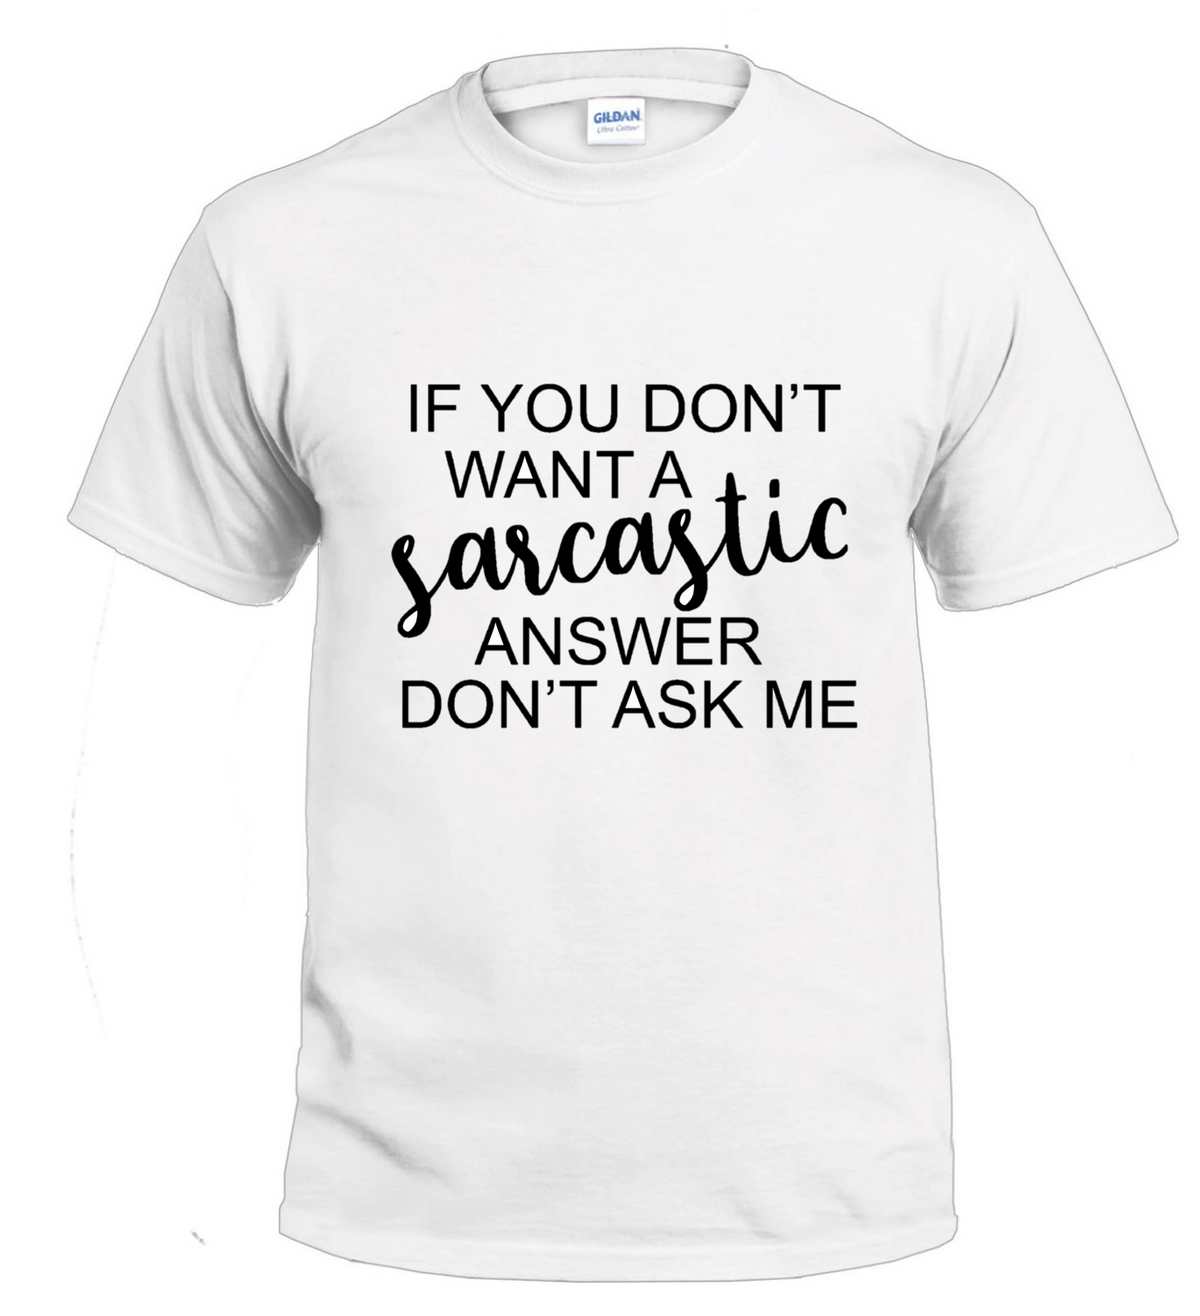 If You Don't Want a Sarcastic Answer Don't Ask Me Sarcasm t-shirt